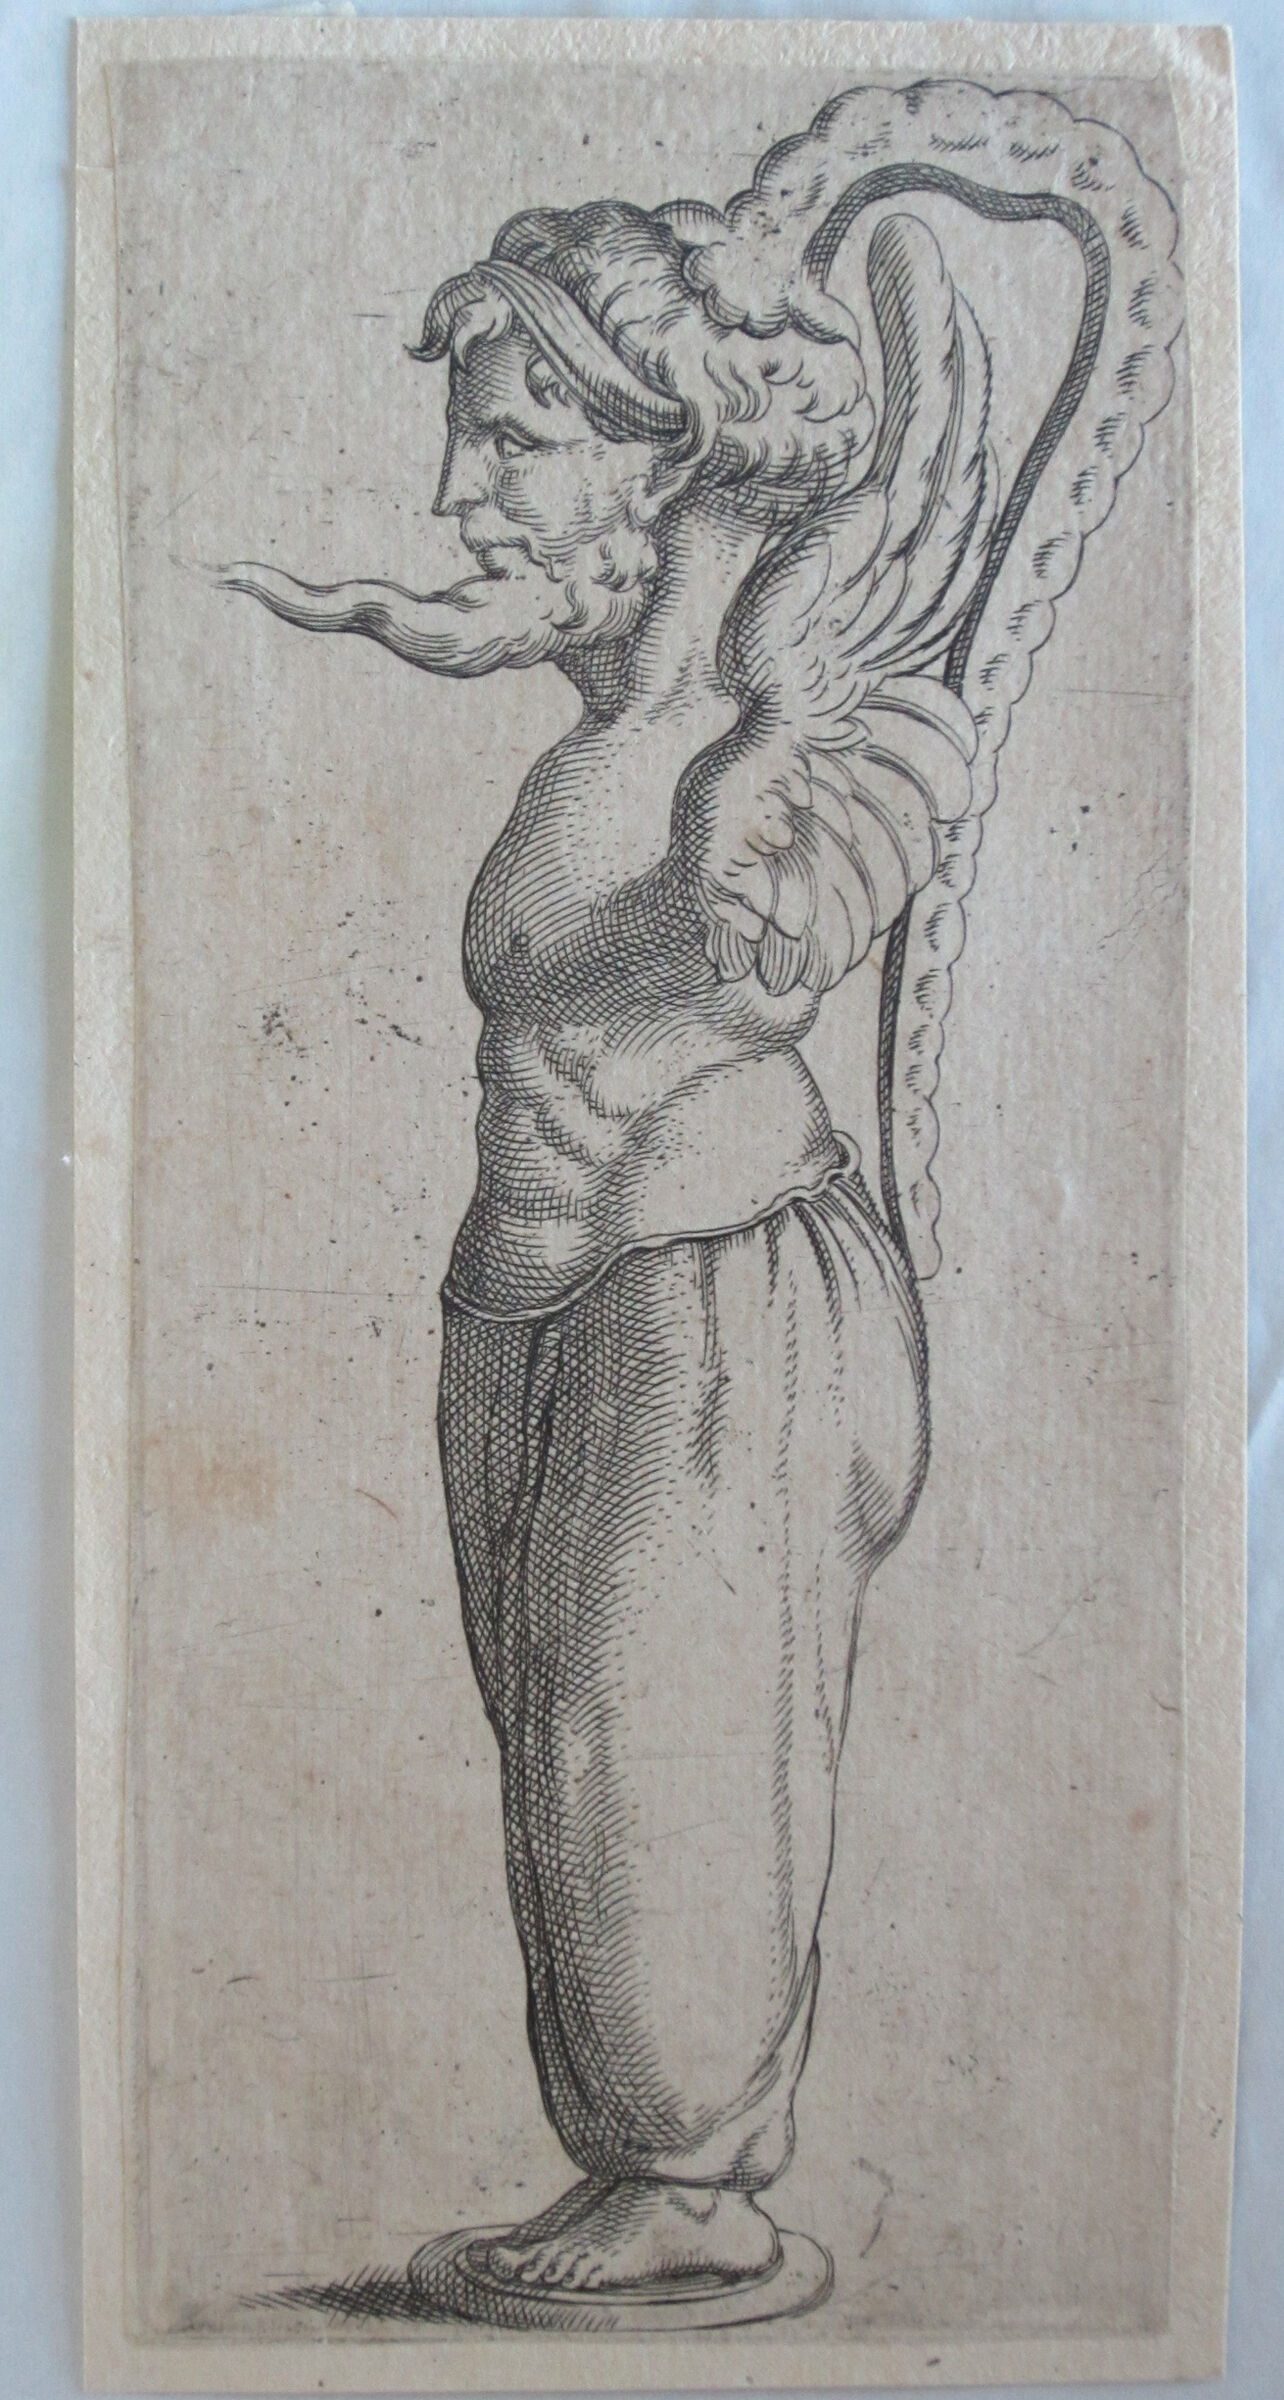 Ewer In The Form Of A Man With Wings For Arms, The Spout His Protruding Beard